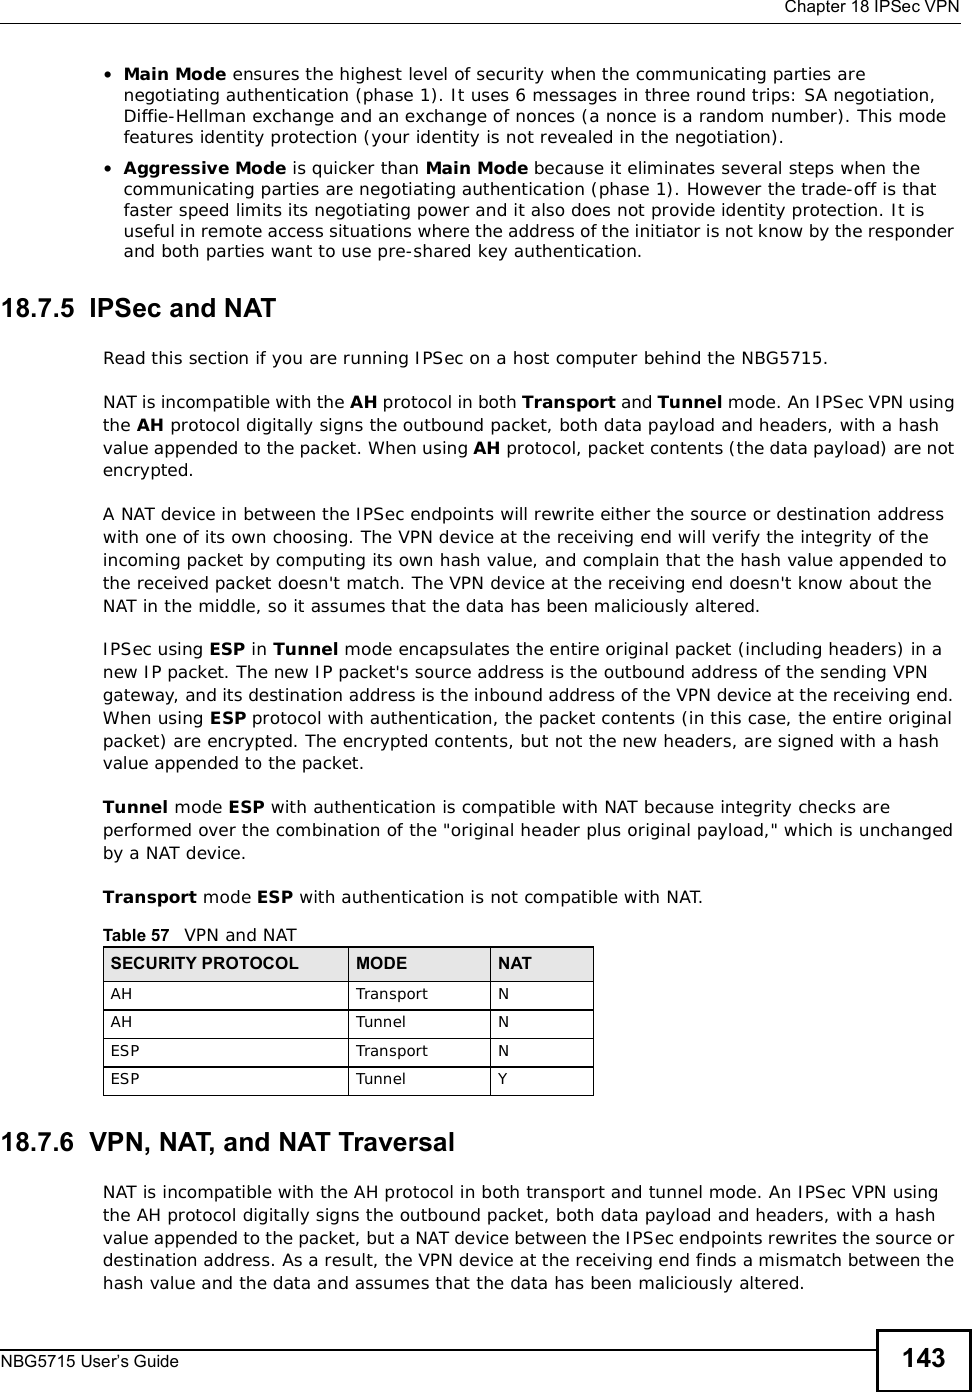  Chapter 18IPSec VPNNBG5715 User’s Guide 143•Main Mode ensures the highest level of security when the communicating parties are negotiating authentication (phase 1). It uses 6 messages in three round trips: SA negotiation, Diffie-Hellman exchange and an exchange of nonces (a nonce is a random number). This mode features identity protection (your identity is not revealed in the negotiation). •Aggressive Mode is quicker than Main Mode because it eliminates several steps when the communicating parties are negotiating authentication (phase 1). However the trade-off is that faster speed limits its negotiating power and it also does not provide identity protection. It is useful in remote access situations where the address of the initiator is not know by the responder and both parties want to use pre-shared key authentication.18.7.5  IPSec and NATRead this section if you are running IPSec on a host computer behind the NBG5715.NAT is incompatible with the AH protocol in both Transport and Tunnel mode. An IPSec VPN using the AH protocol digitally signs the outbound packet, both data payload and headers, with a hash value appended to the packet. When using AH protocol, packet contents (the data payload) are not encrypted.A NAT device in between the IPSec endpoints will rewrite either the source or destination address with one of its own choosing. The VPN device at the receiving end will verify the integrity of the incoming packet by computing its own hash value, and complain that the hash value appended to the received packet doesn&apos;t match. The VPN device at the receiving end doesn&apos;t know about the NAT in the middle, so it assumes that the data has been maliciously altered.IPSec using ESP in Tunnel mode encapsulates the entire original packet (including headers) in a new IP packet. The new IP packet&apos;s source address is the outbound address of the sending VPN gateway, and its destination address is the inbound address of the VPN device at the receiving end. When using ESP protocol with authentication, the packet contents (in this case, the entire original packet) are encrypted. The encrypted contents, but not the new headers, are signed with a hash value appended to the packet.Tunnel mode ESP with authentication is compatible with NAT because integrity checks are performed over the combination of the &quot;original header plus original payload,&quot; which is unchanged by a NAT device. Transport mode ESP with authentication is not compatible with NAT.18.7.6  VPN, NAT, and NAT TraversalNAT is incompatible with the AH protocol in both transportand tunnelmode. An IPSec VPN using the AH protocol digitally signs the outbound packet, both data payload and headers, with a hash value appended to the packet, but a NAT device between the IPSec endpoints rewrites the source or destination address. As a result, the VPN device at the receiving end finds a mismatch between the hash value and the data and assumes that the data has been maliciously altered.Table 57   VPN and NATSECURITY PROTOCOL MODE NATAH Transport NAH Tunnel NESP Transport NESP Tunnel Y